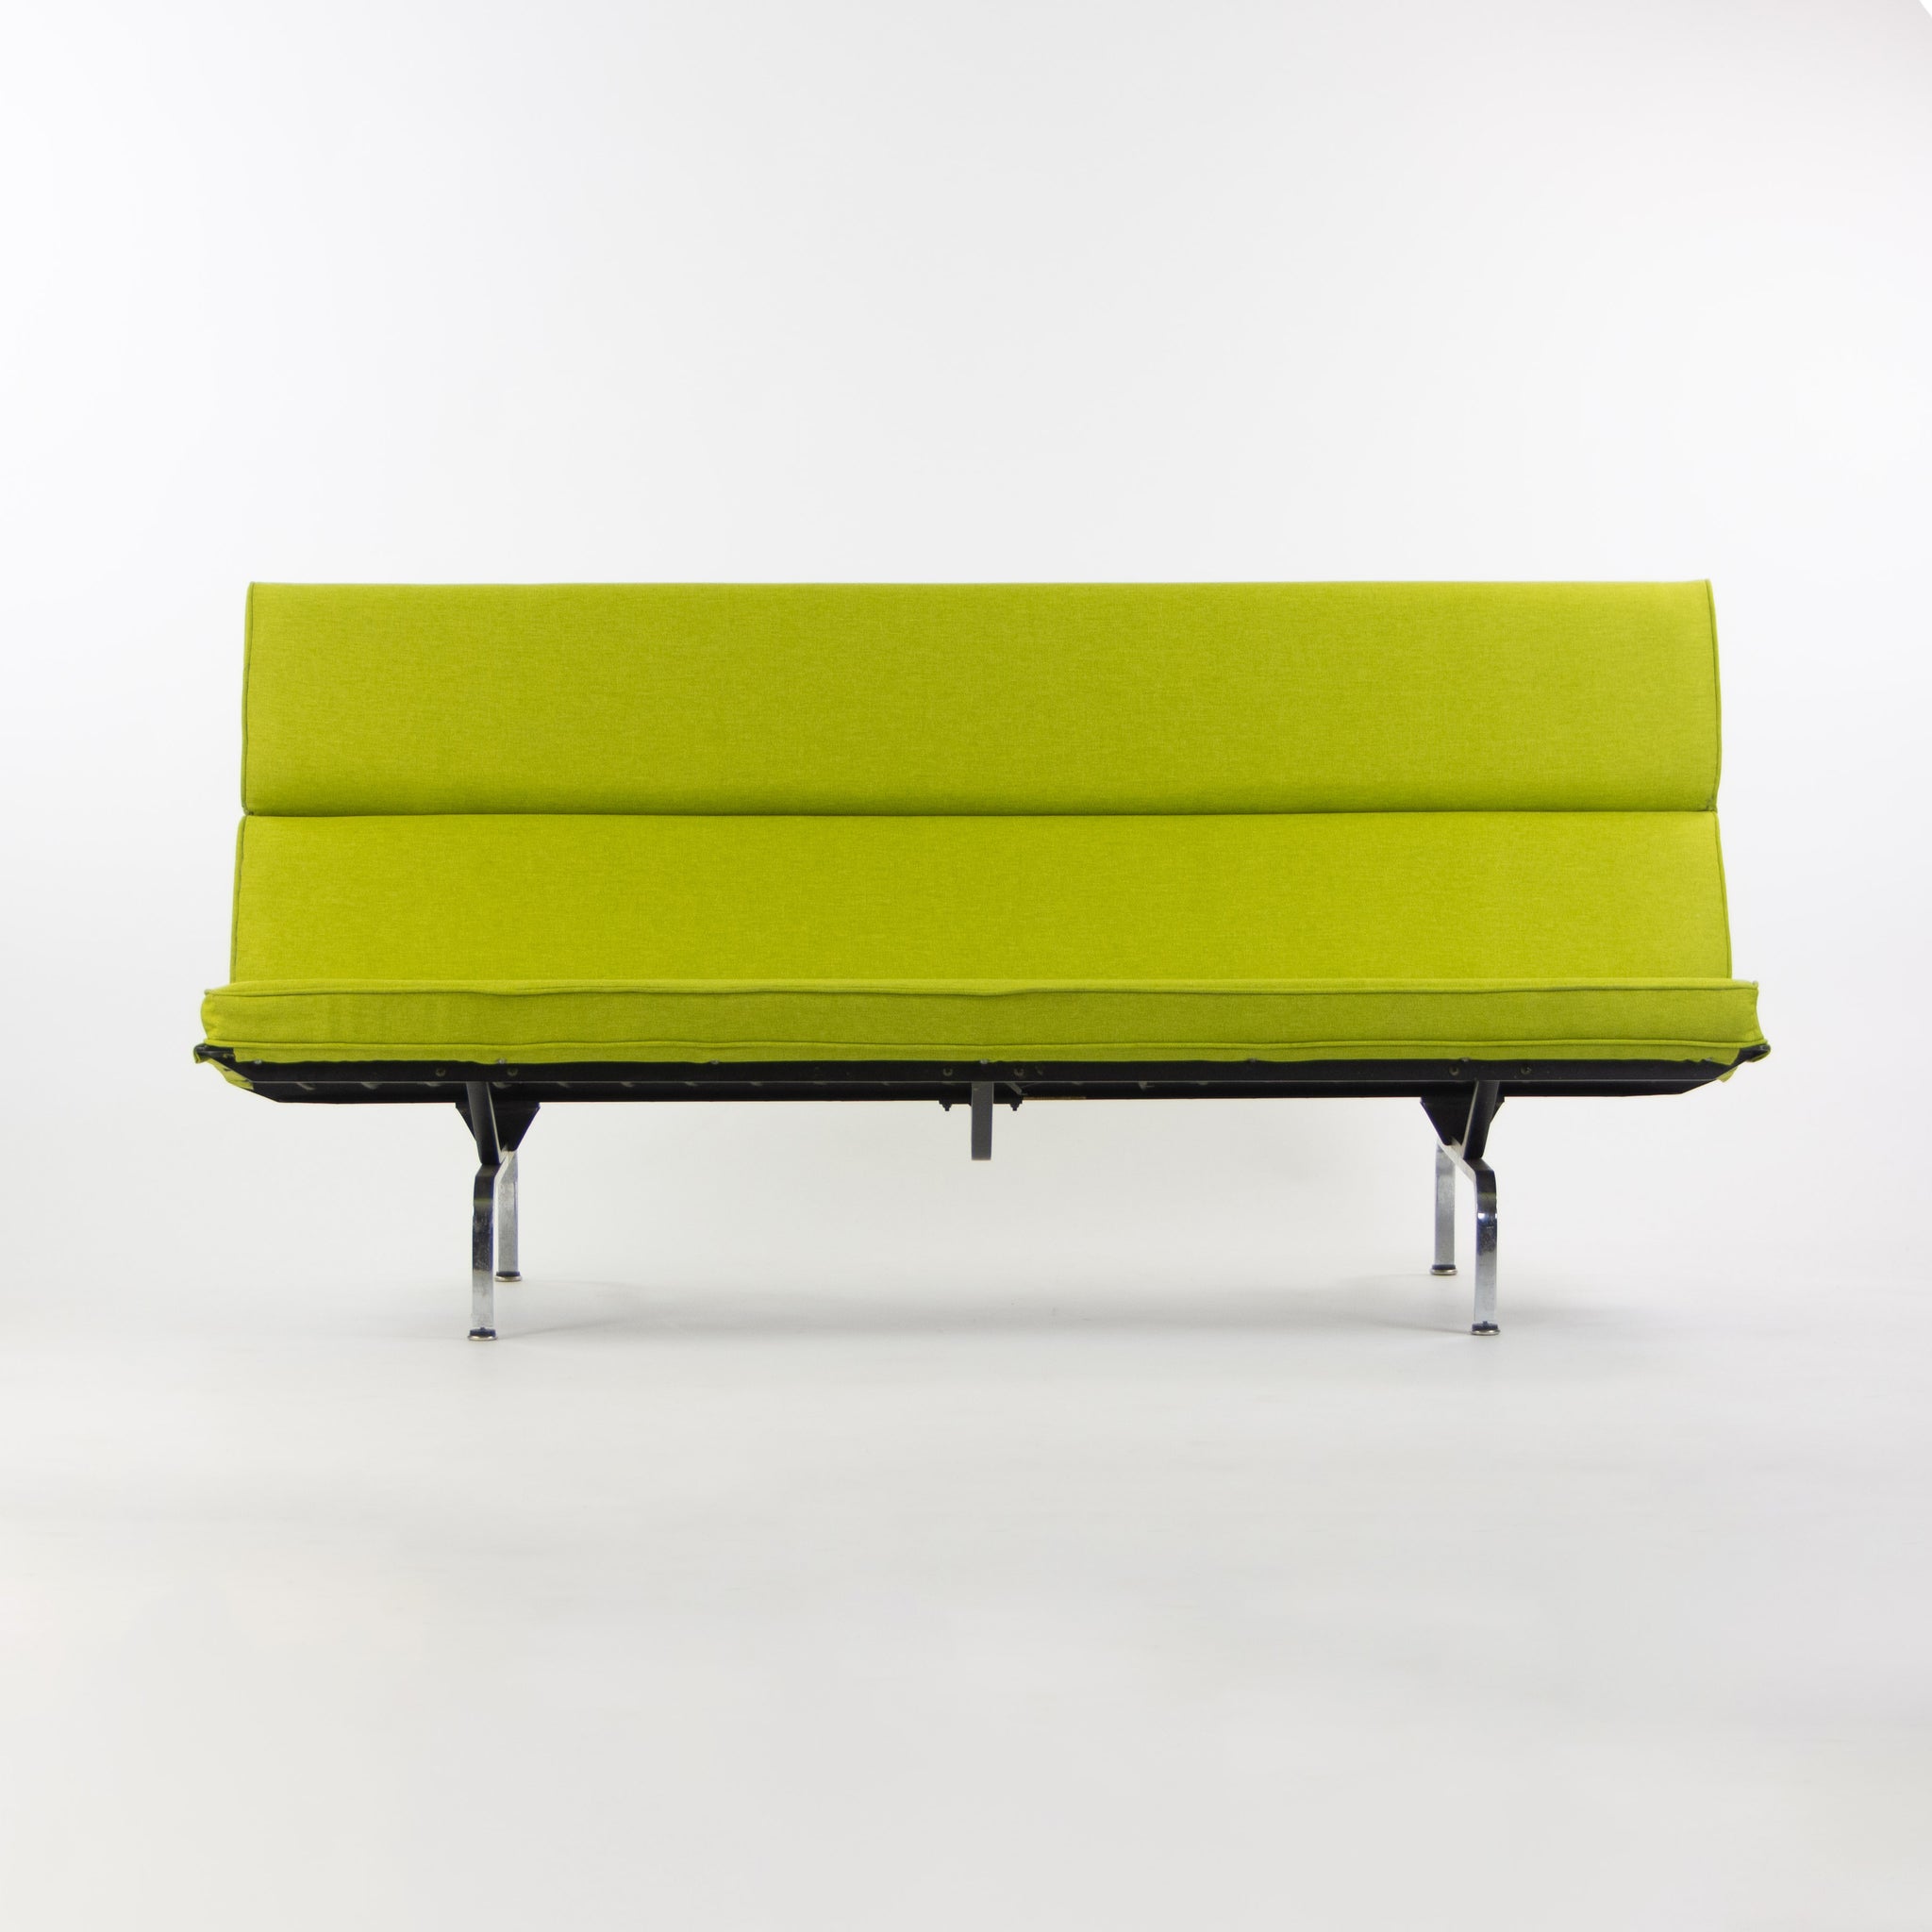 SOLD Herman Miller Eames Vintage Sofa Compact with Lime Green Knoll Upholstery